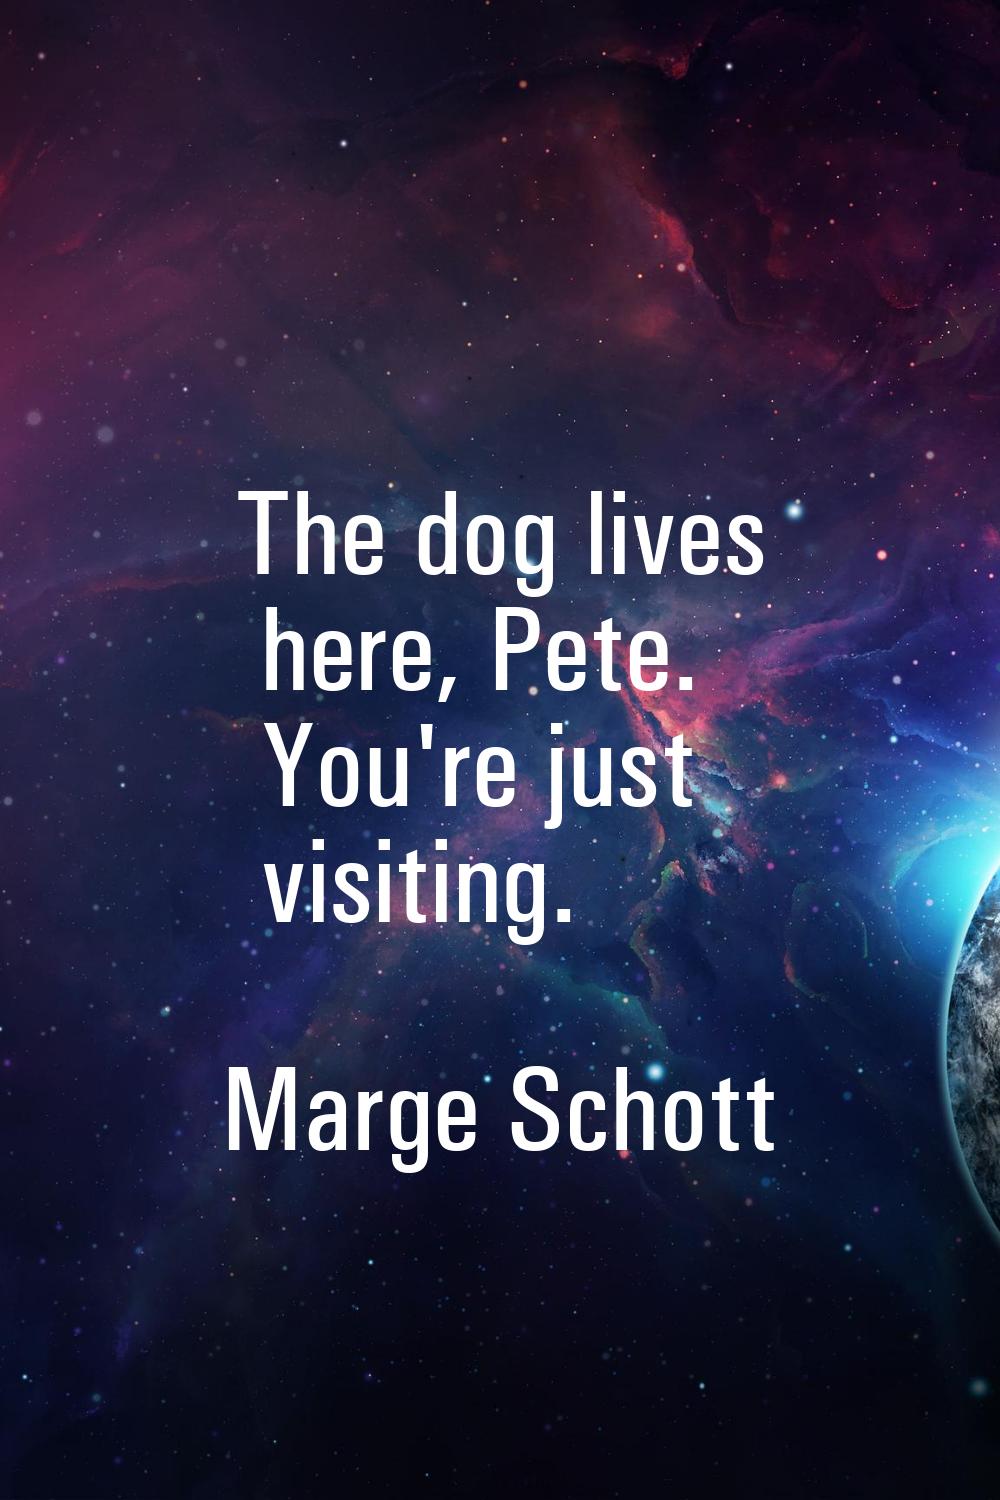 The dog lives here, Pete. You're just visiting.